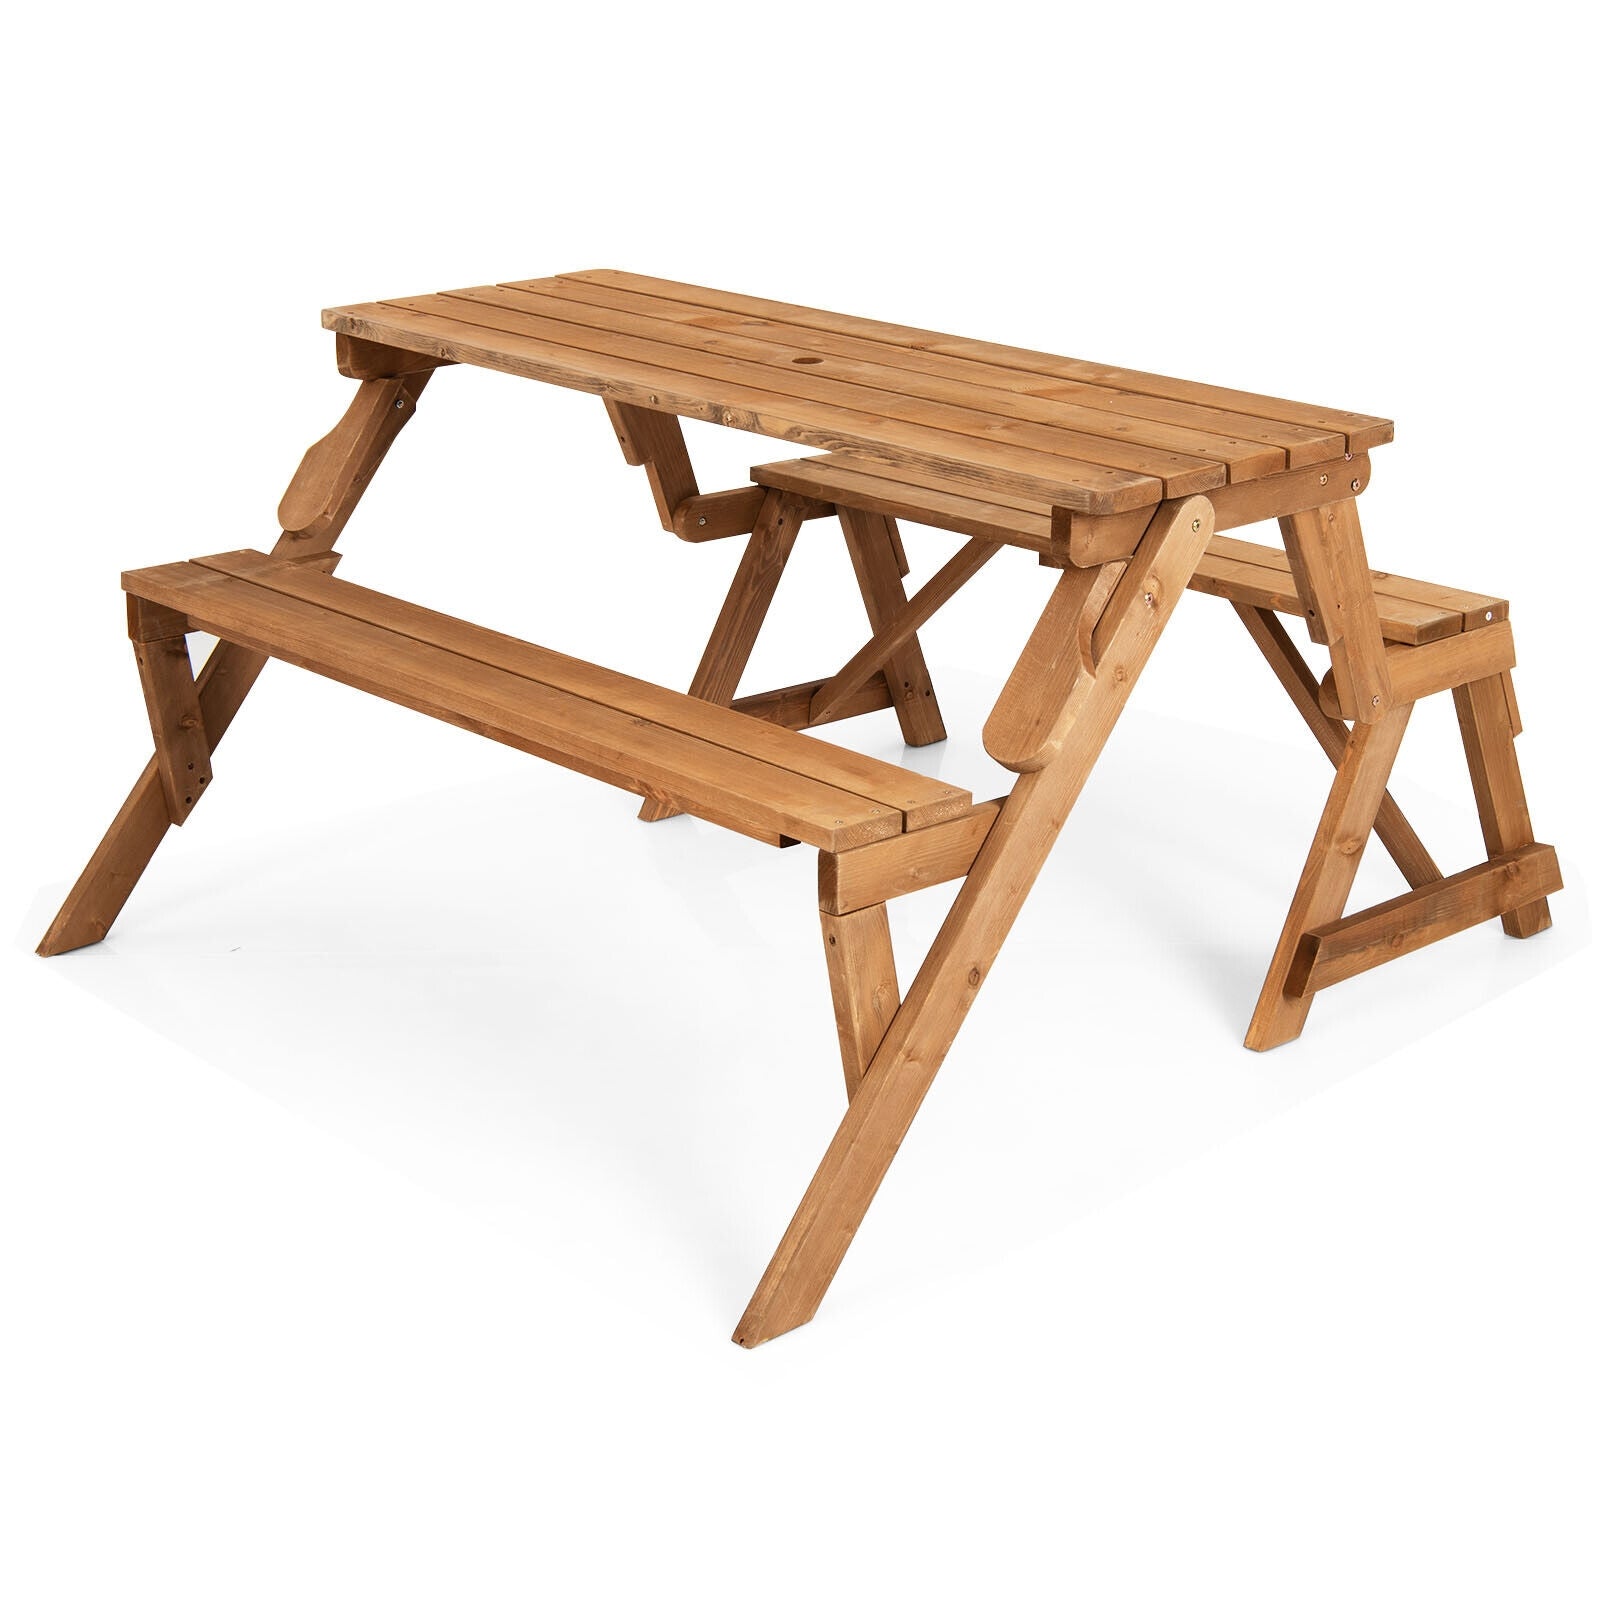 2-in-1 Interchangeable Wooden Outdoor Picnic Table Bench with Umbrella Hole